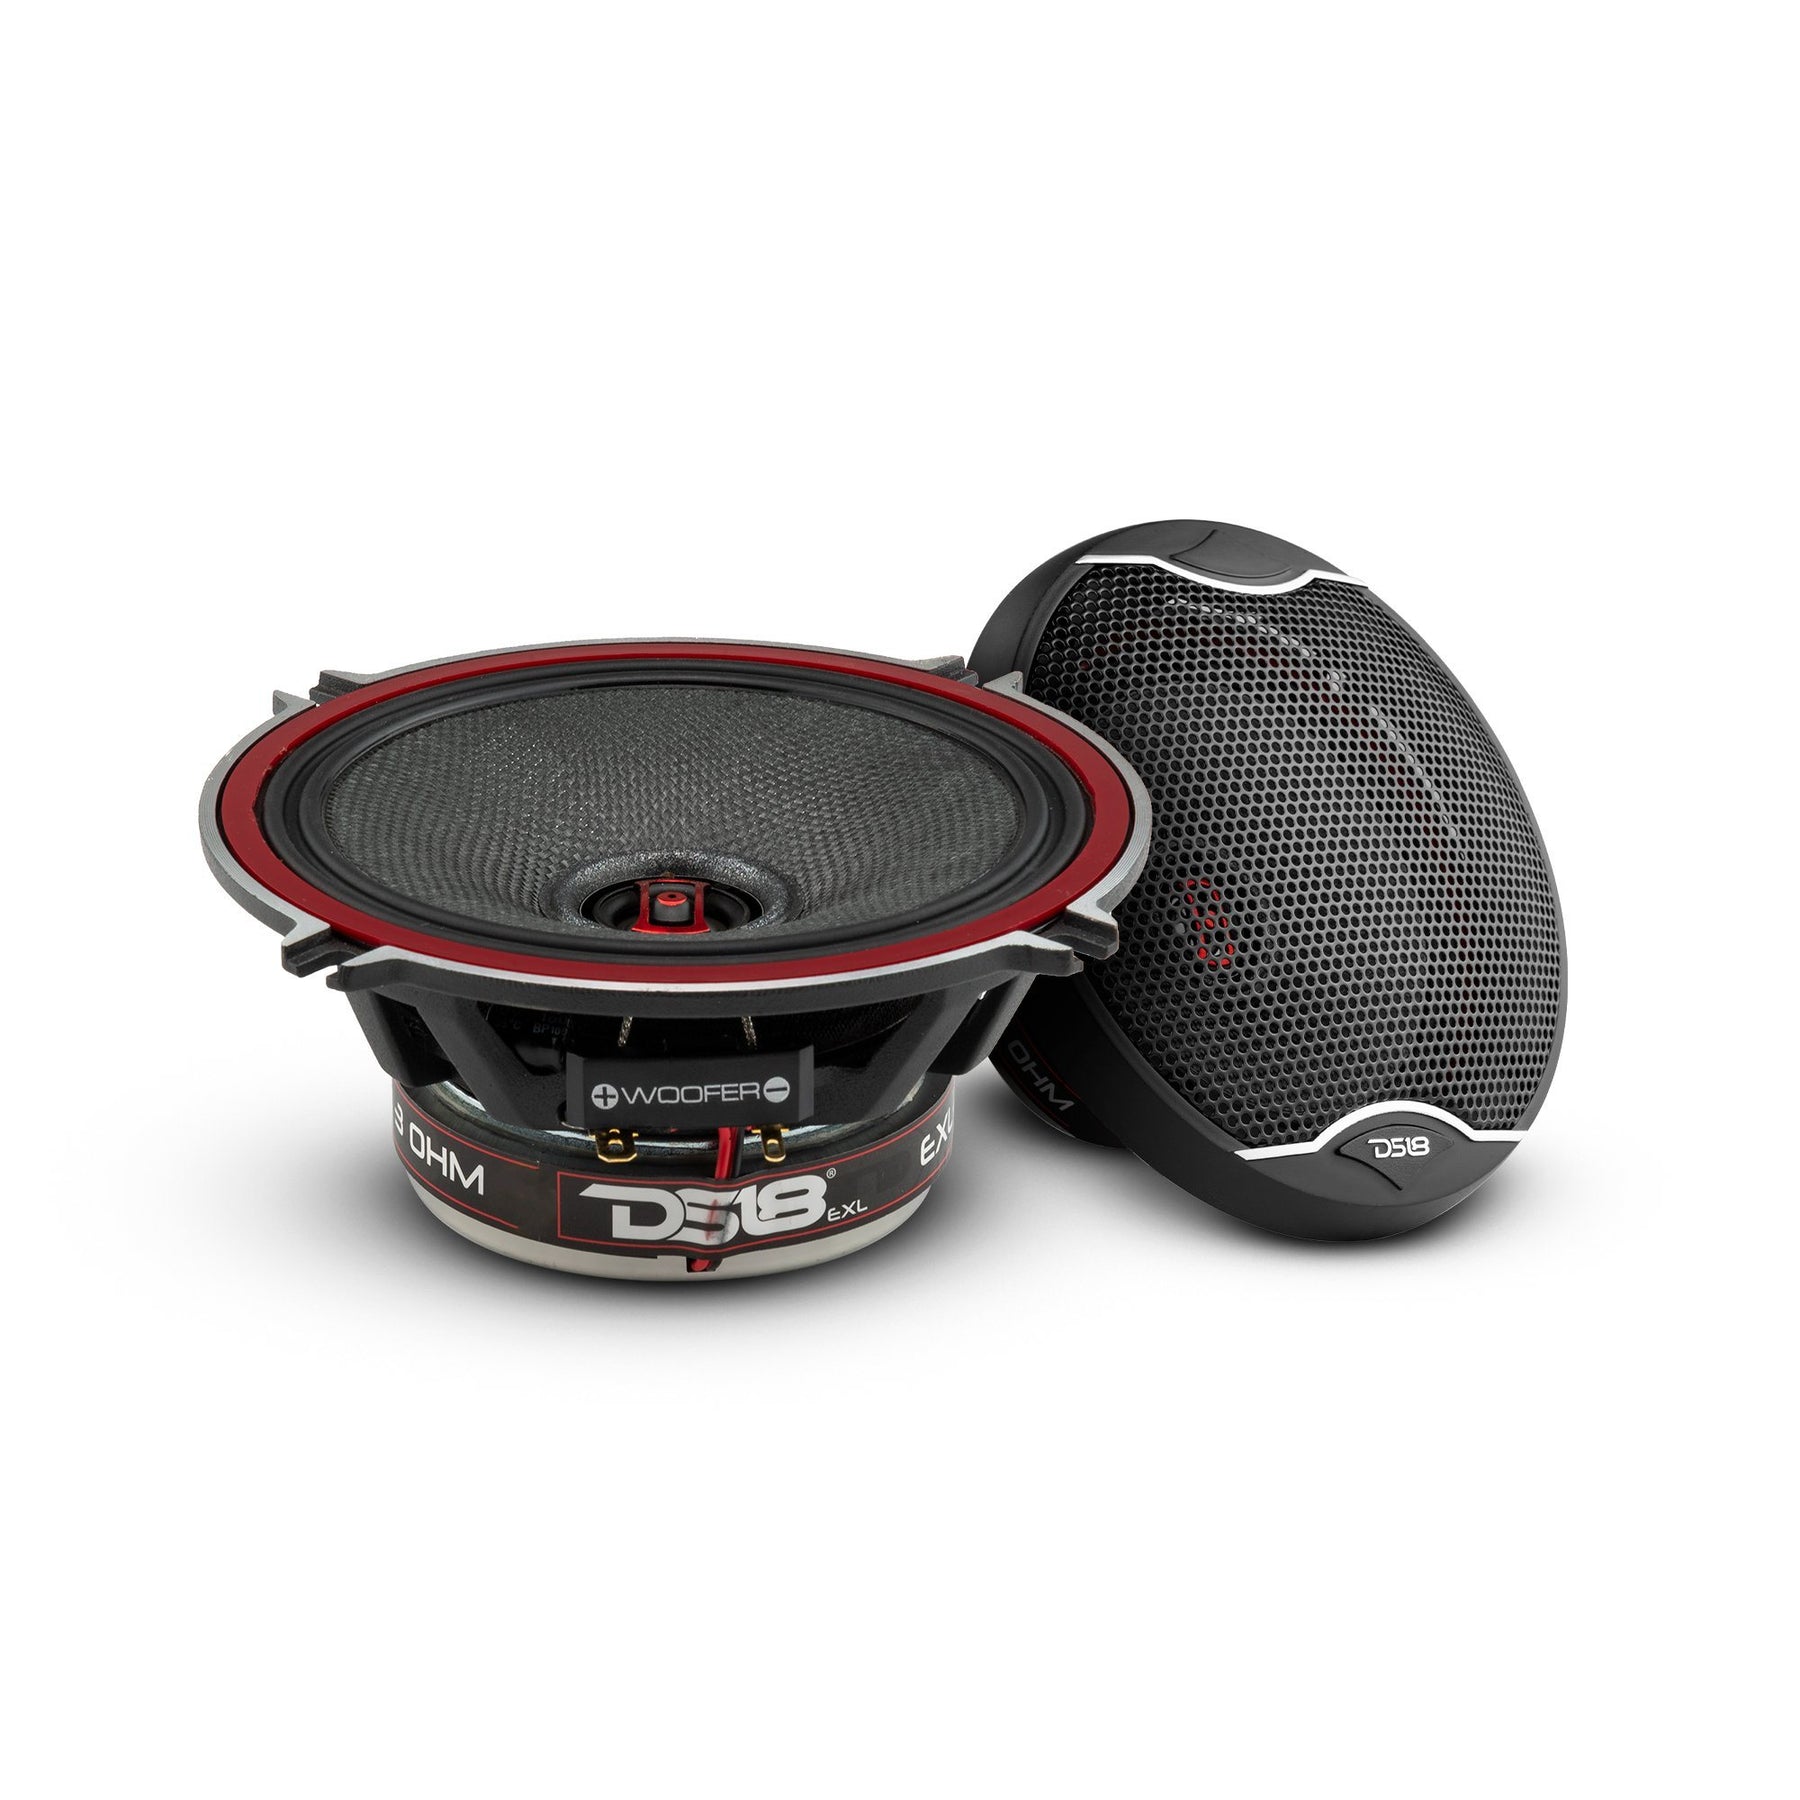 morgen Boomgaard ga sightseeing DS18 EXL 5.25" 2-Way Coaxial Speaker with Fiber Glass Cone 340 Watts 3-Ohm  car audio stereo speakers